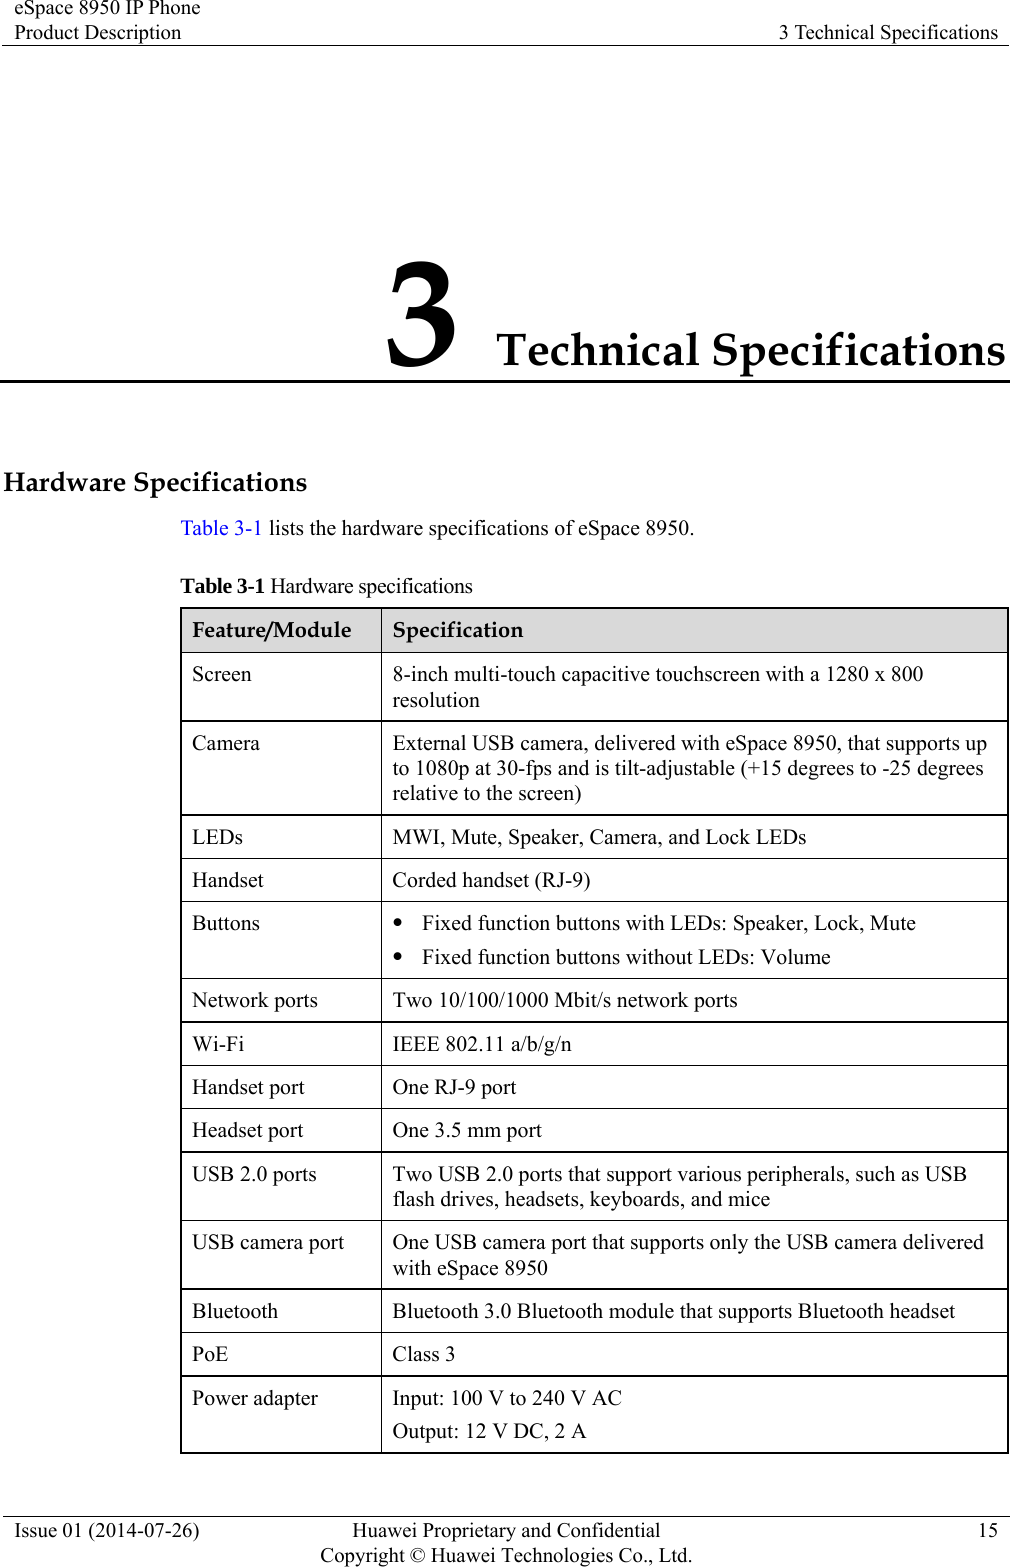 eSpace 8950 IP Phone Product Description  3 Technical Specifications Issue 01 (2014-07-26)  Huawei Proprietary and Confidential         Copyright © Huawei Technologies Co., Ltd.15 3 Technical Specifications Hardware Specifications Table 3-1 lists the hardware specifications of eSpace 8950. Table 3-1 Hardware specifications Feature/Module  Specification Screen  8-inch multi-touch capacitive touchscreen with a 1280 x 800 resolution Camera  External USB camera, delivered with eSpace 8950, that supports up to 1080p at 30-fps and is tilt-adjustable (+15 degrees to -25 degrees relative to the screen) LEDs  MWI, Mute, Speaker, Camera, and Lock LEDs Handset Corded handset (RJ-9) Buttons   Fixed function buttons with LEDs: Speaker, Lock, Mute  Fixed function buttons without LEDs: Volume Network ports  Two 10/100/1000 Mbit/s network ports Wi-Fi IEEE 802.11 a/b/g/n Handset port  One RJ-9 port Headset port  One 3.5 mm port USB 2.0 ports  Two USB 2.0 ports that support various peripherals, such as USB flash drives, headsets, keyboards, and mice USB camera port  One USB camera port that supports only the USB camera delivered with eSpace 8950 Bluetooth  Bluetooth 3.0 Bluetooth module that supports Bluetooth headset PoE Class 3 Power adapter  Input: 100 V to 240 V AC Output: 12 V DC, 2 A 